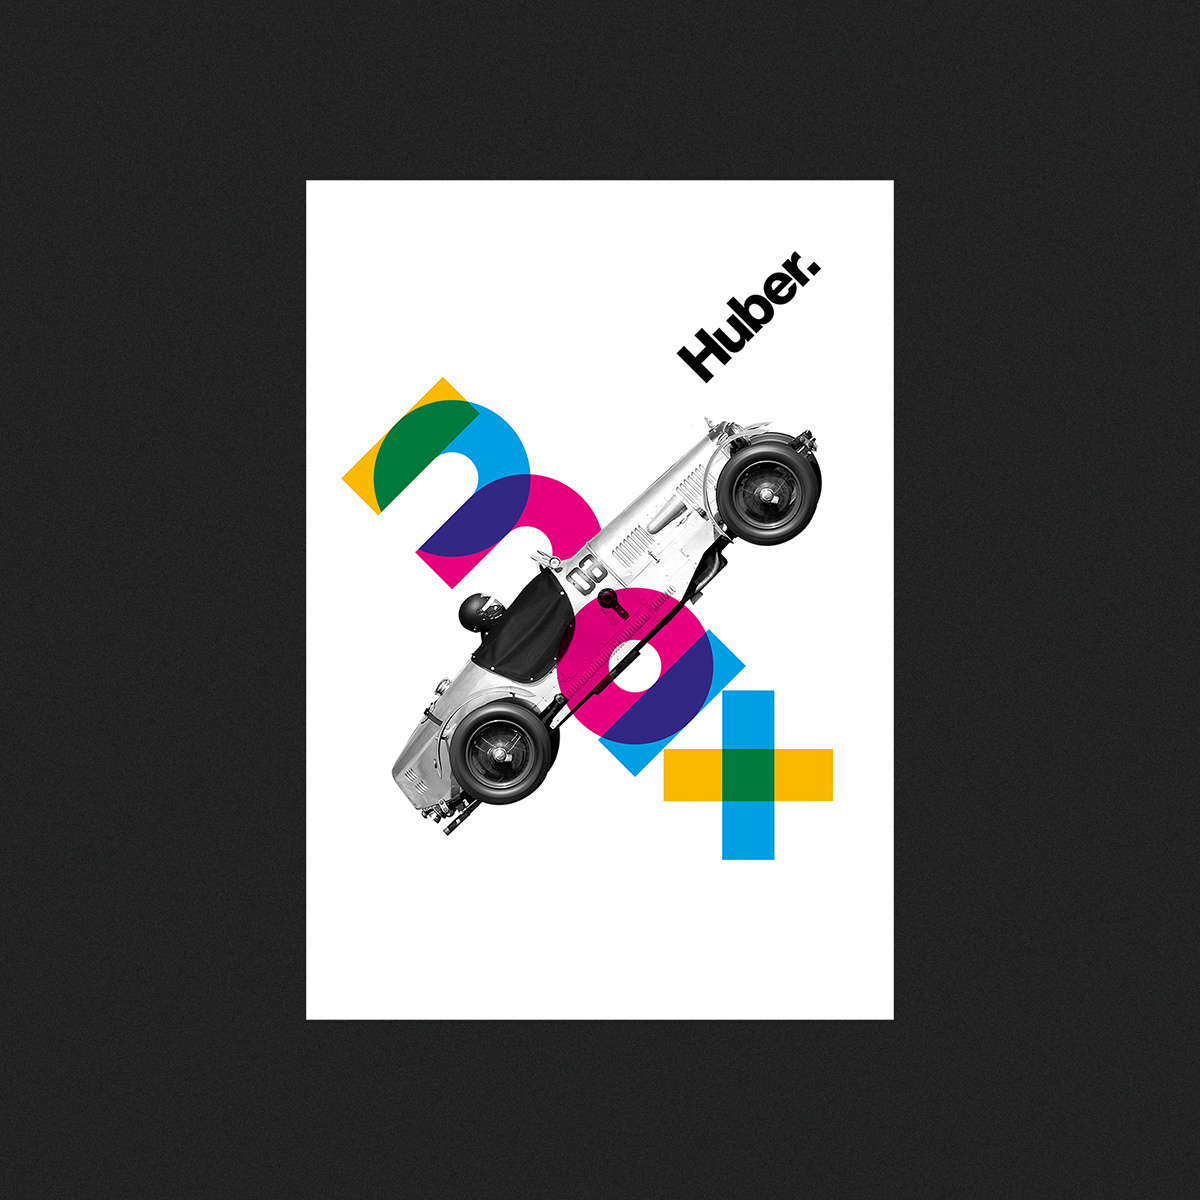 colors Exhibition  font free letter poster posters swiss Typeface